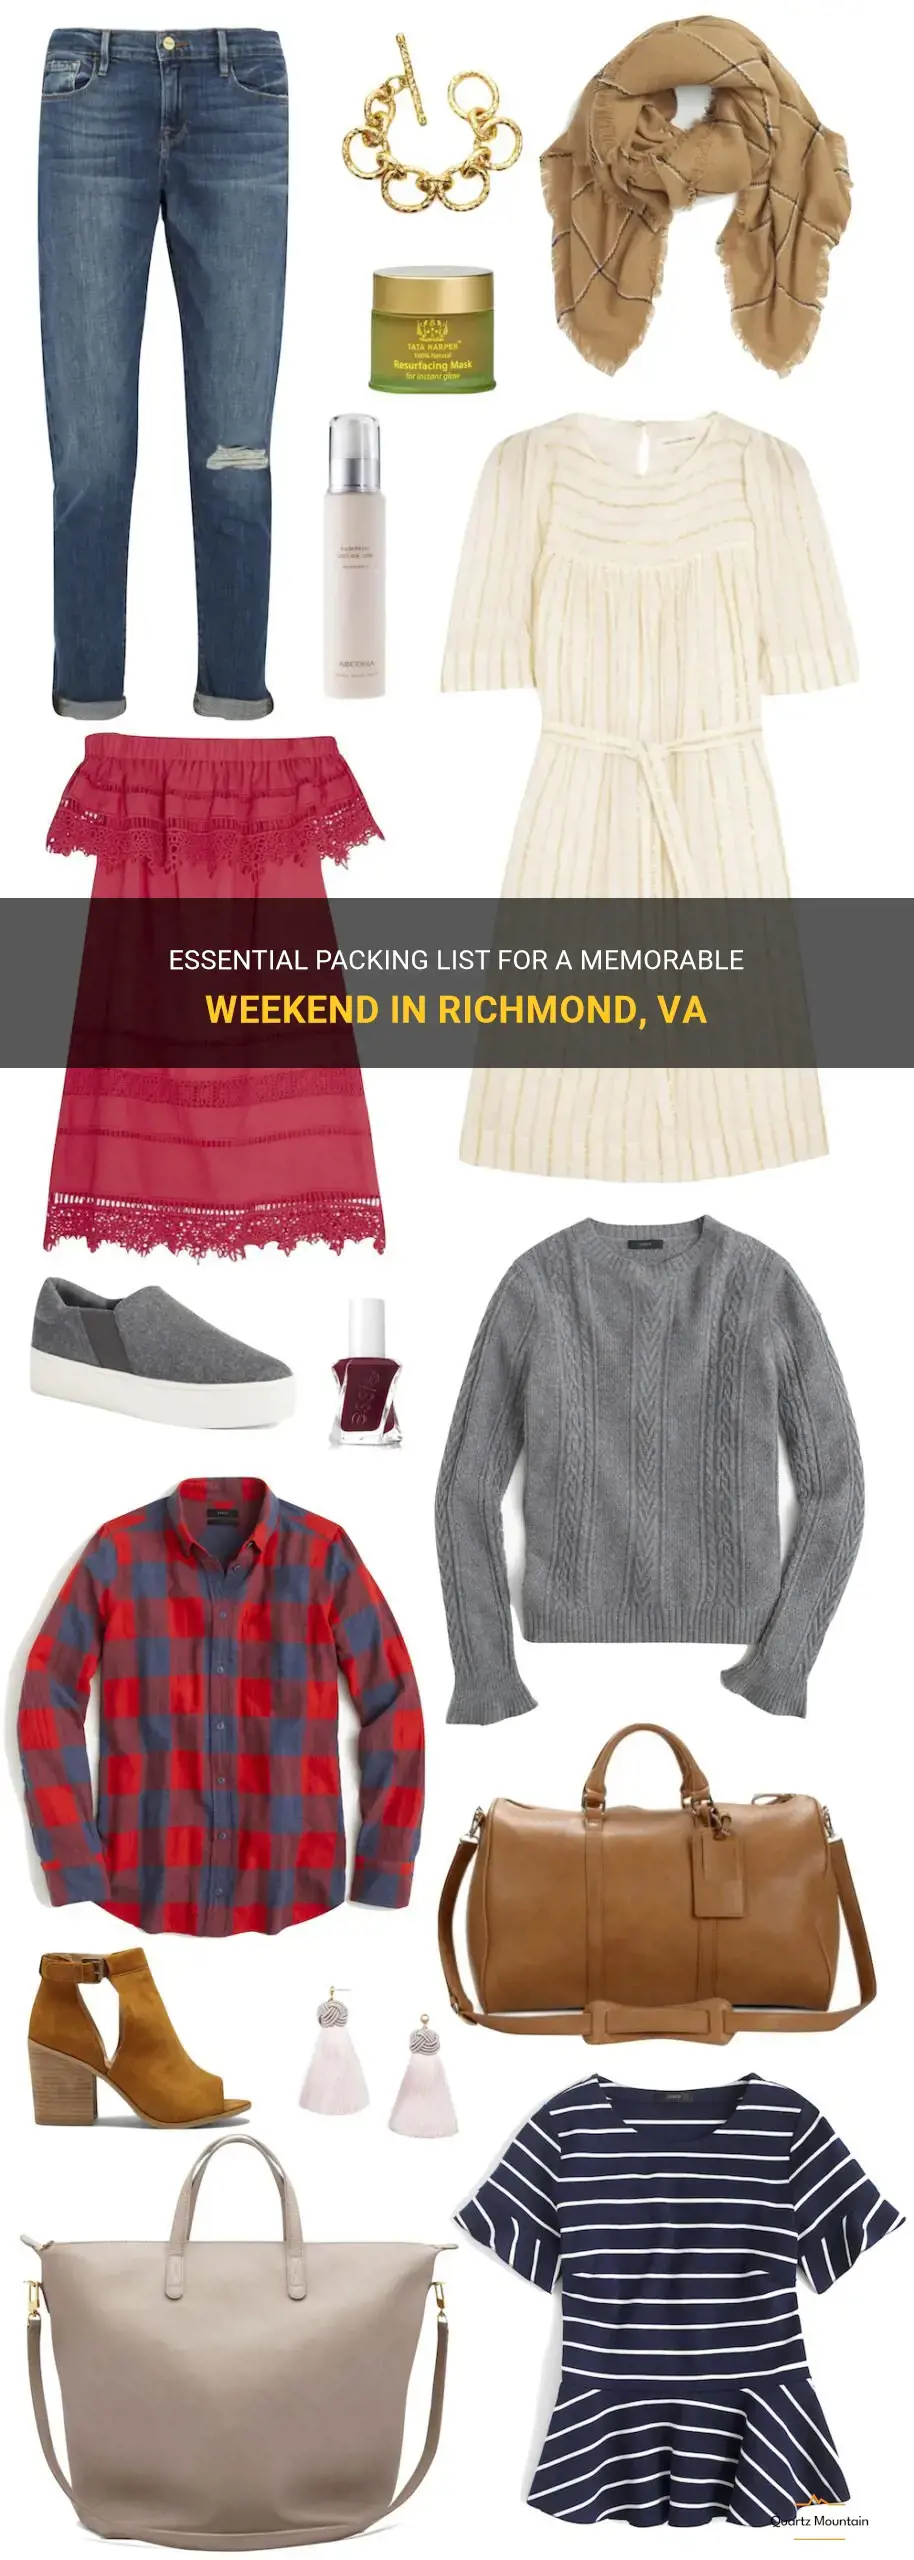 what to pack for a weekend in richmond va